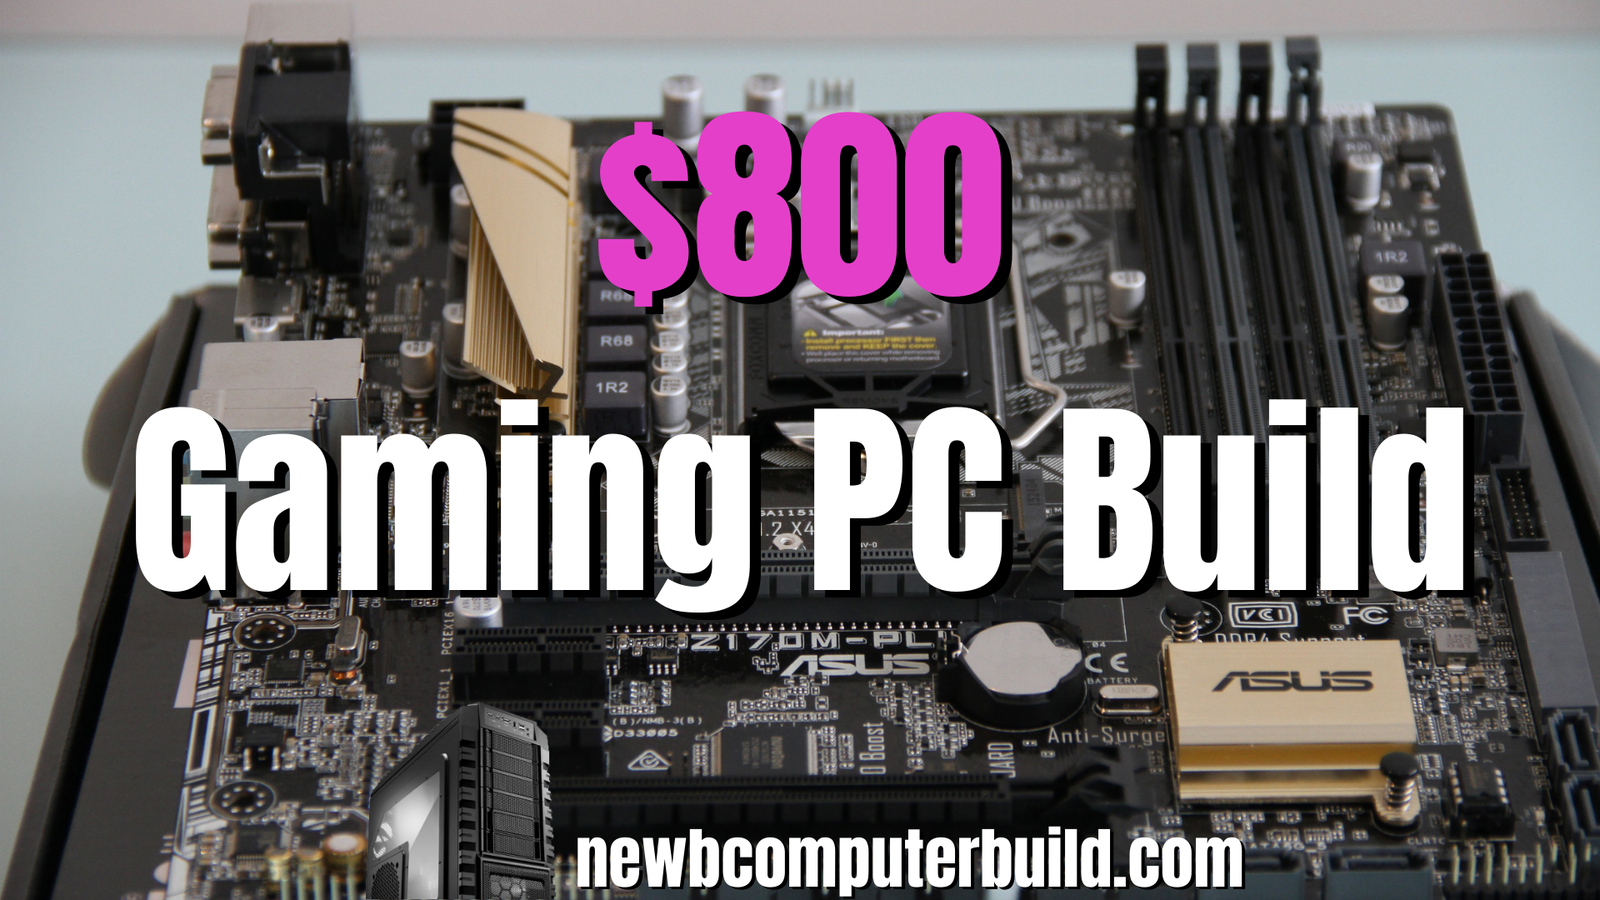 The Best $800 Gaming PC Build for 2022